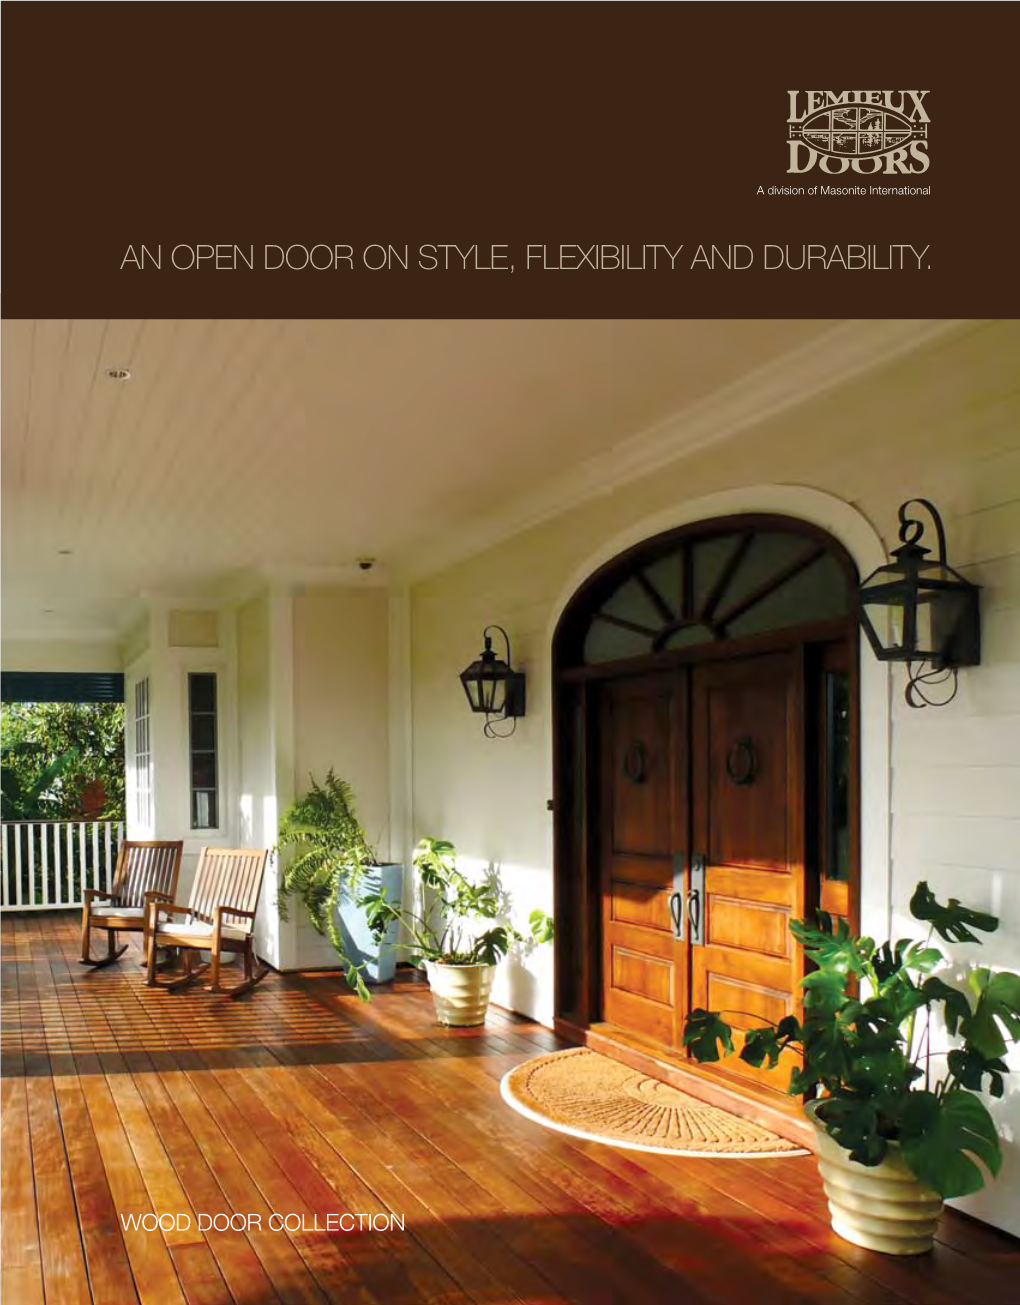 An Open Door on Style, Flexibility and Durability